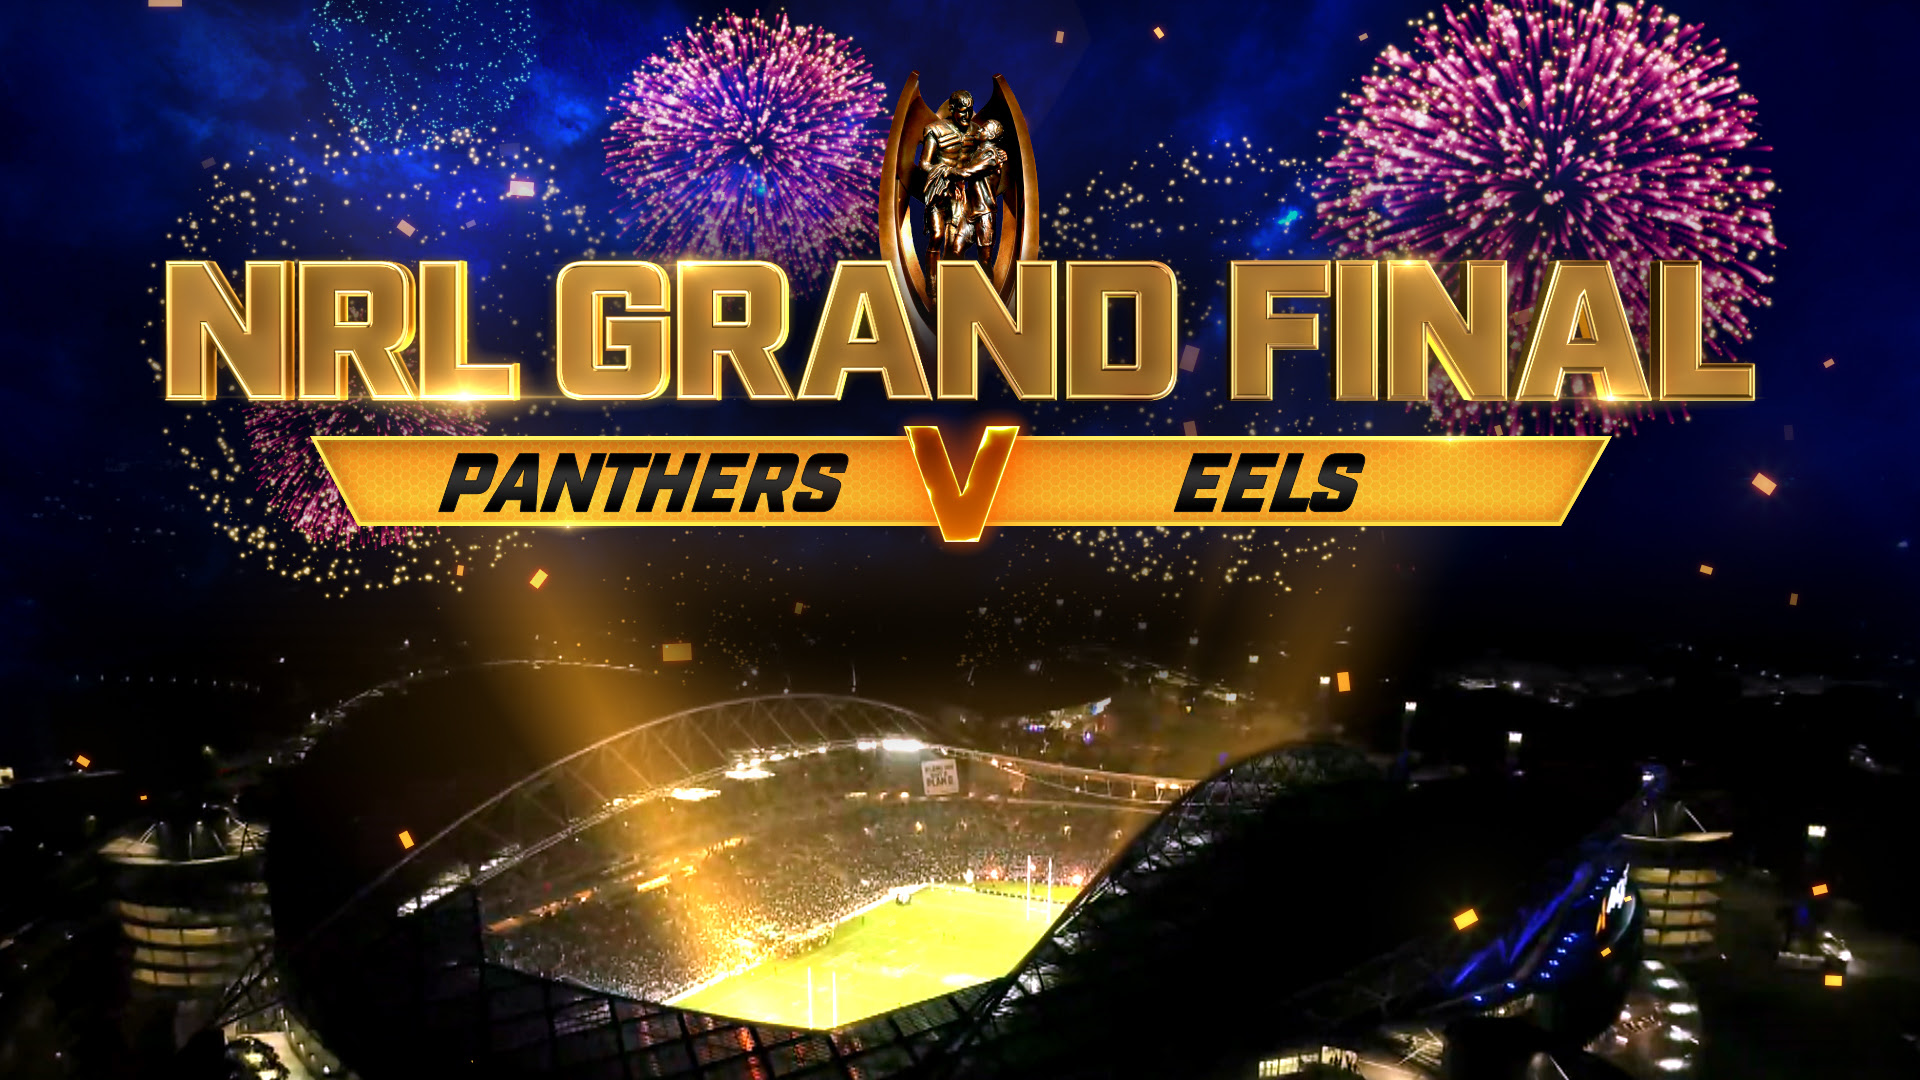 NRL Grand Final exclusive, live and free on Channel 9 and 9Now